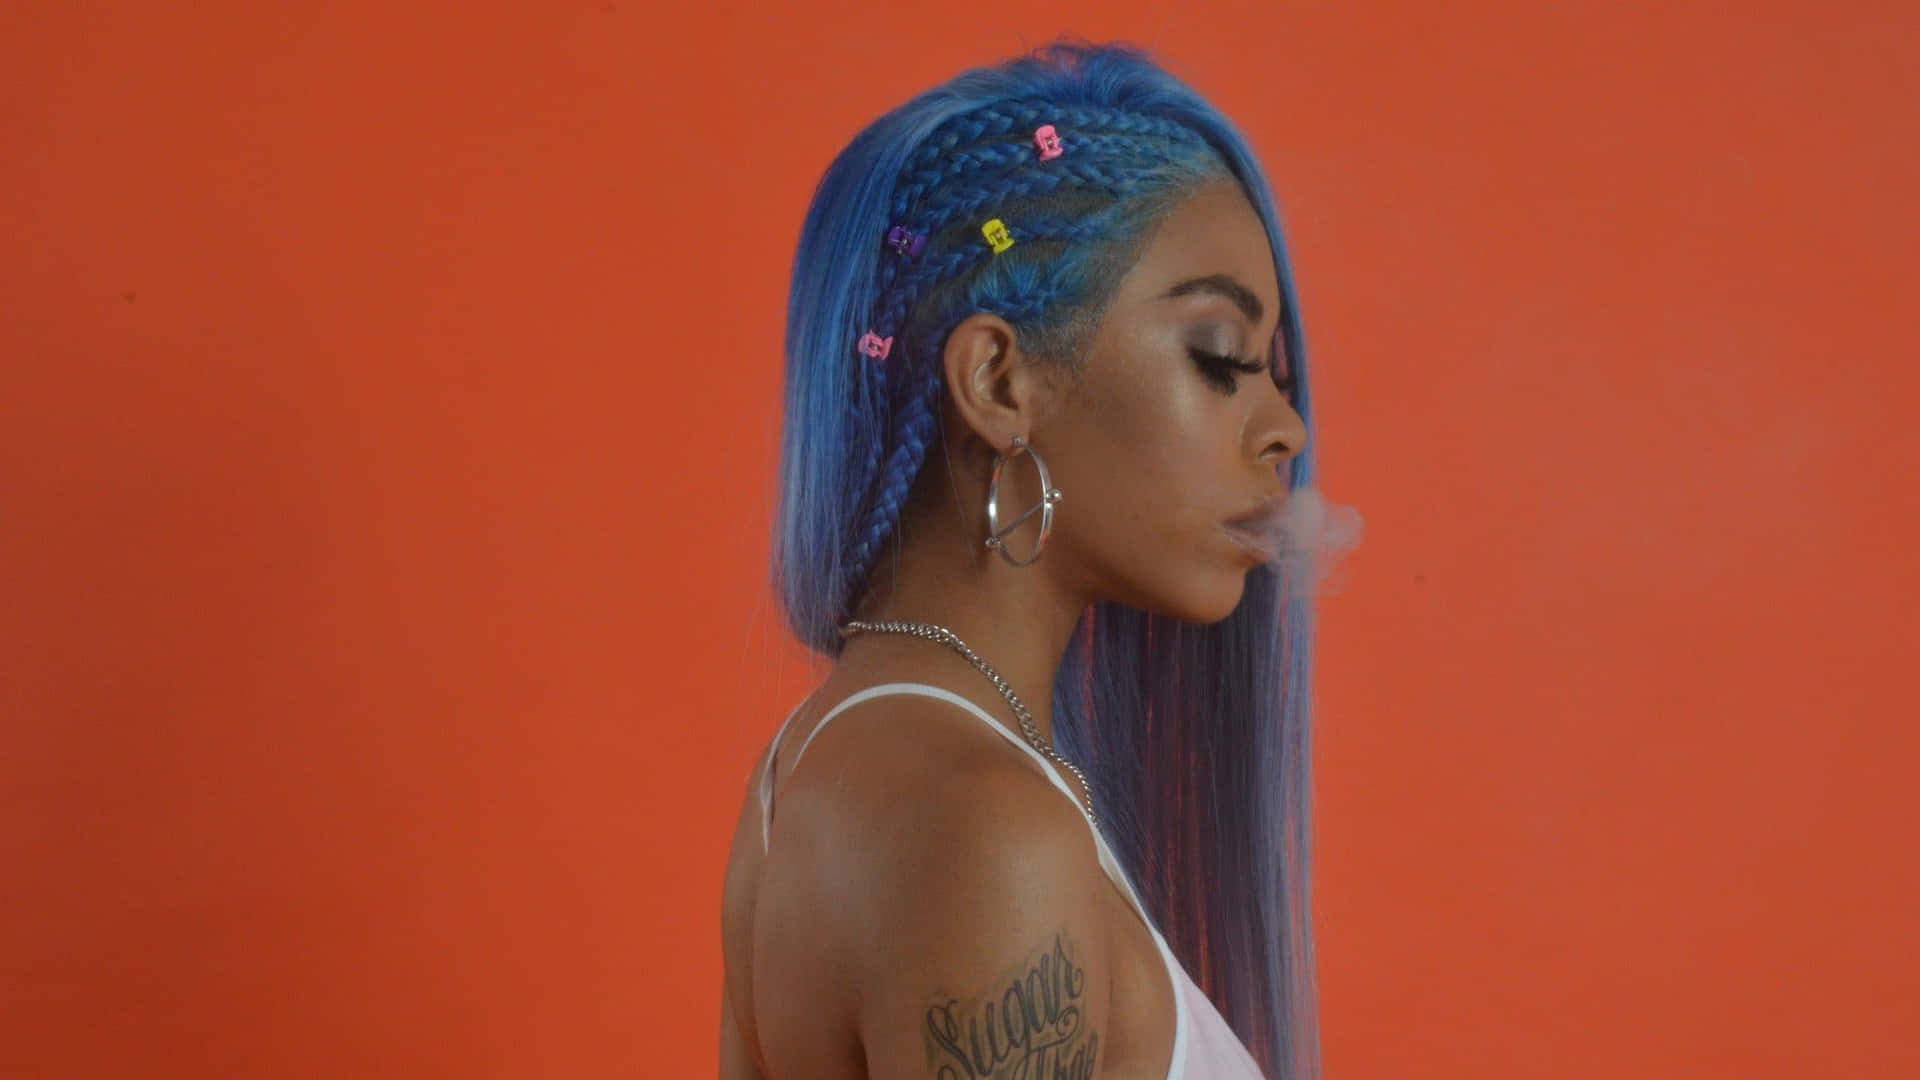 Americanrapper Rico Nasty Is Known For Her Unique Style And Energetic Performances. Her Music Often Incorporates Elements Of Hip-hop, Trap, And Punk Rock. With Her Bold And Colorful Personality, Rico Nasty Has Gained A Dedicated Fan Base And Is Constantly Pushing Boundaries In The Music Industry. Fondo de pantalla